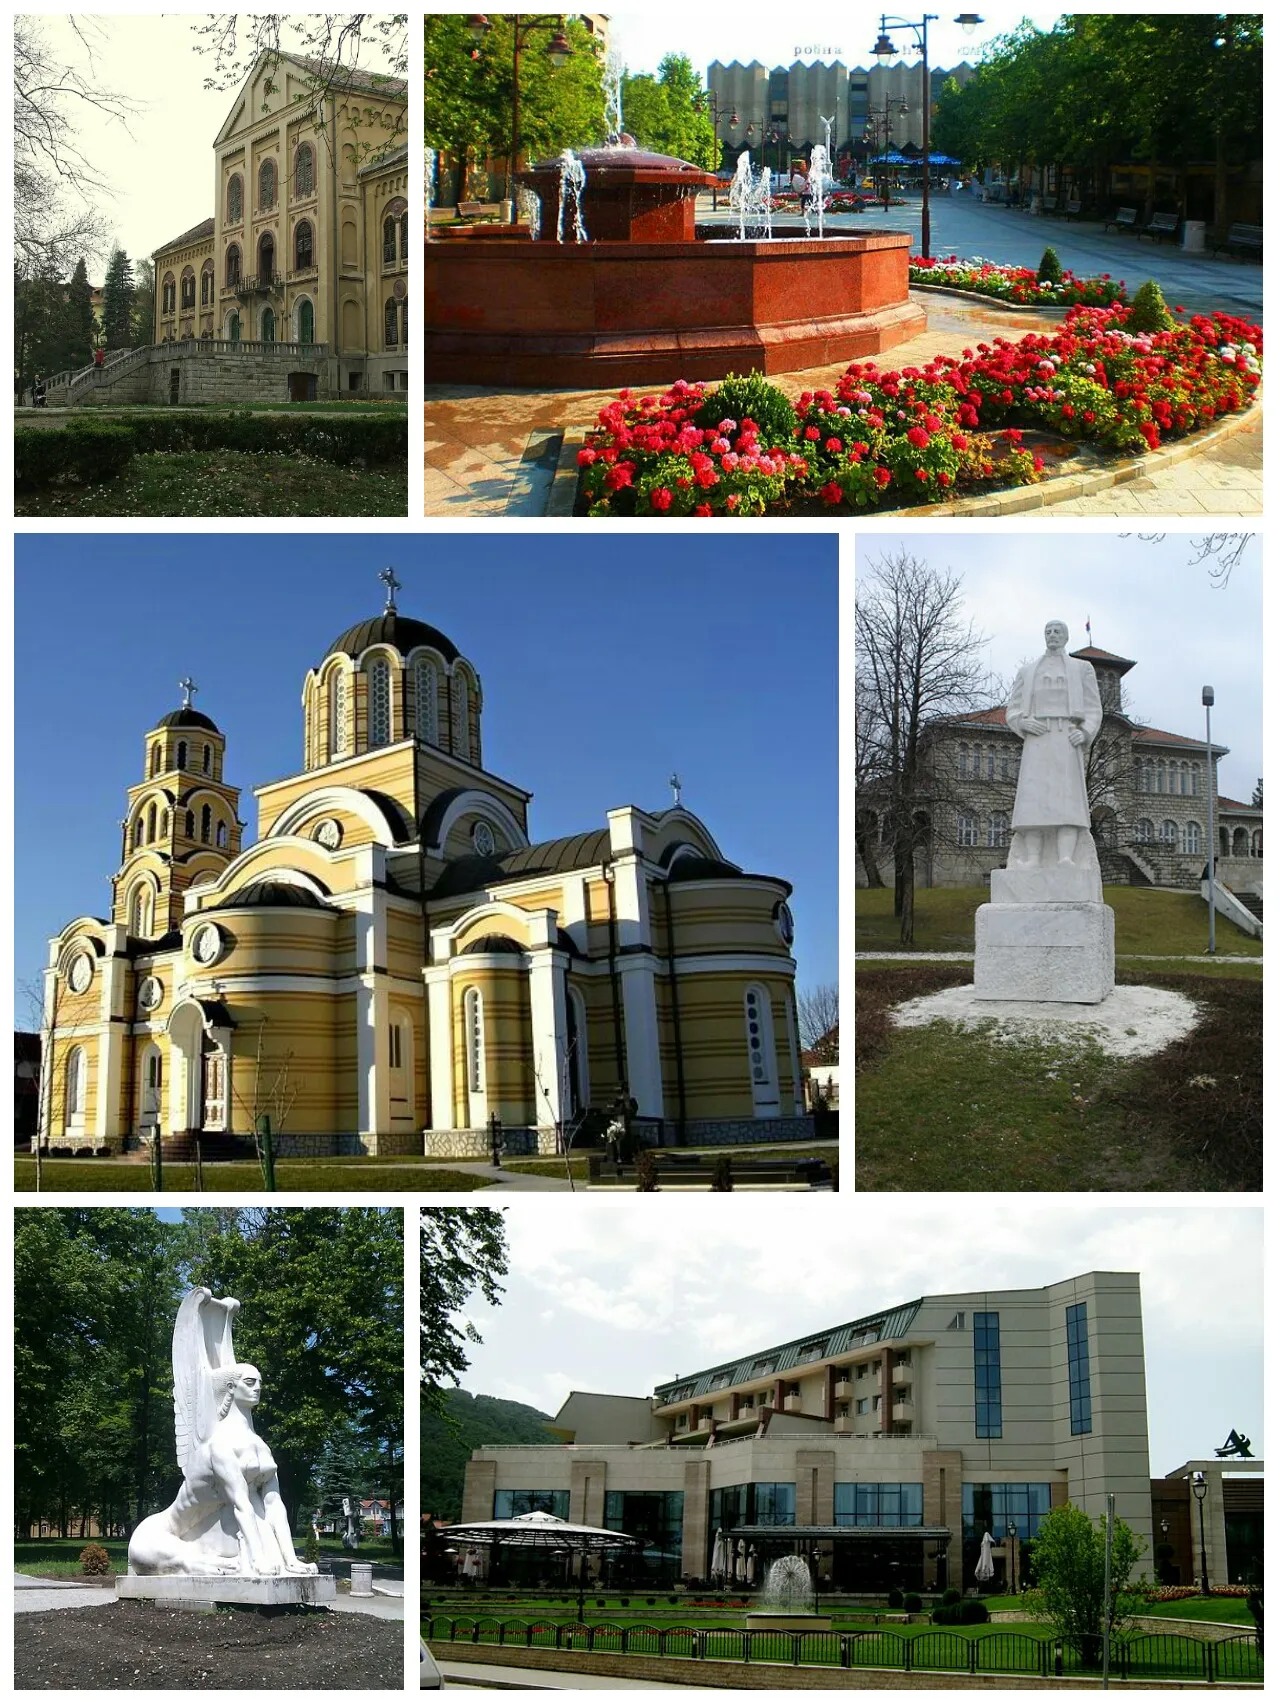 Photo showing: Aranđelovac- photomontage (Prince Mihailo's summer residence, The Main Square in Aranđelovac, Orthodox Church of the Holy Apostles Peter and Paul in Aranđelovac, Monument of Karađorđe in front of school in Orašac near Aranđelovac, Monument of sphinx in the park of Bukovička Banja Spa, Hotel ,,Source")